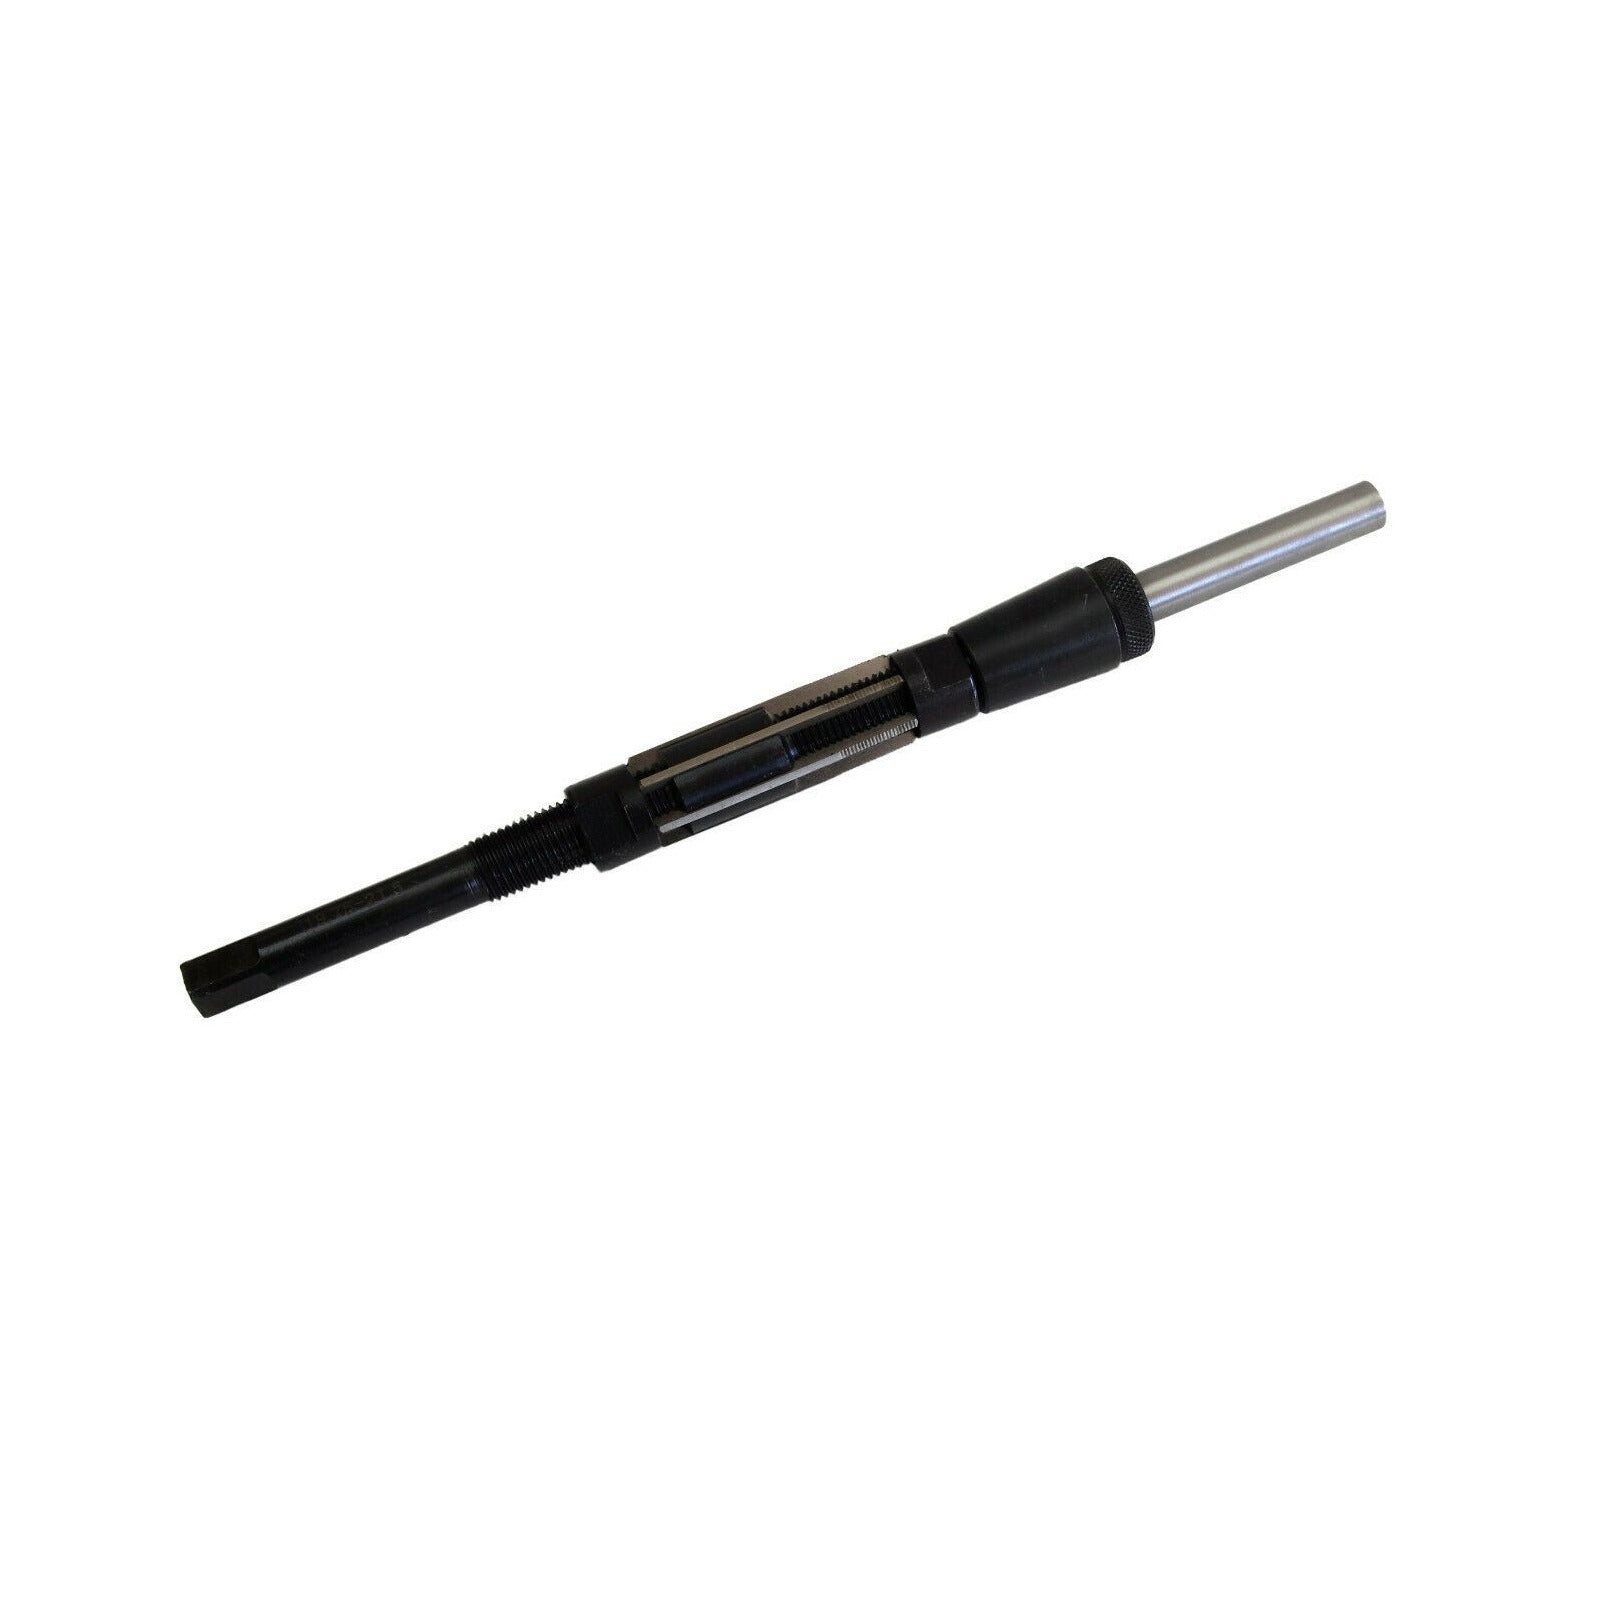 19.75 - 21.5mm Adjustable Hand Reamer with Guide